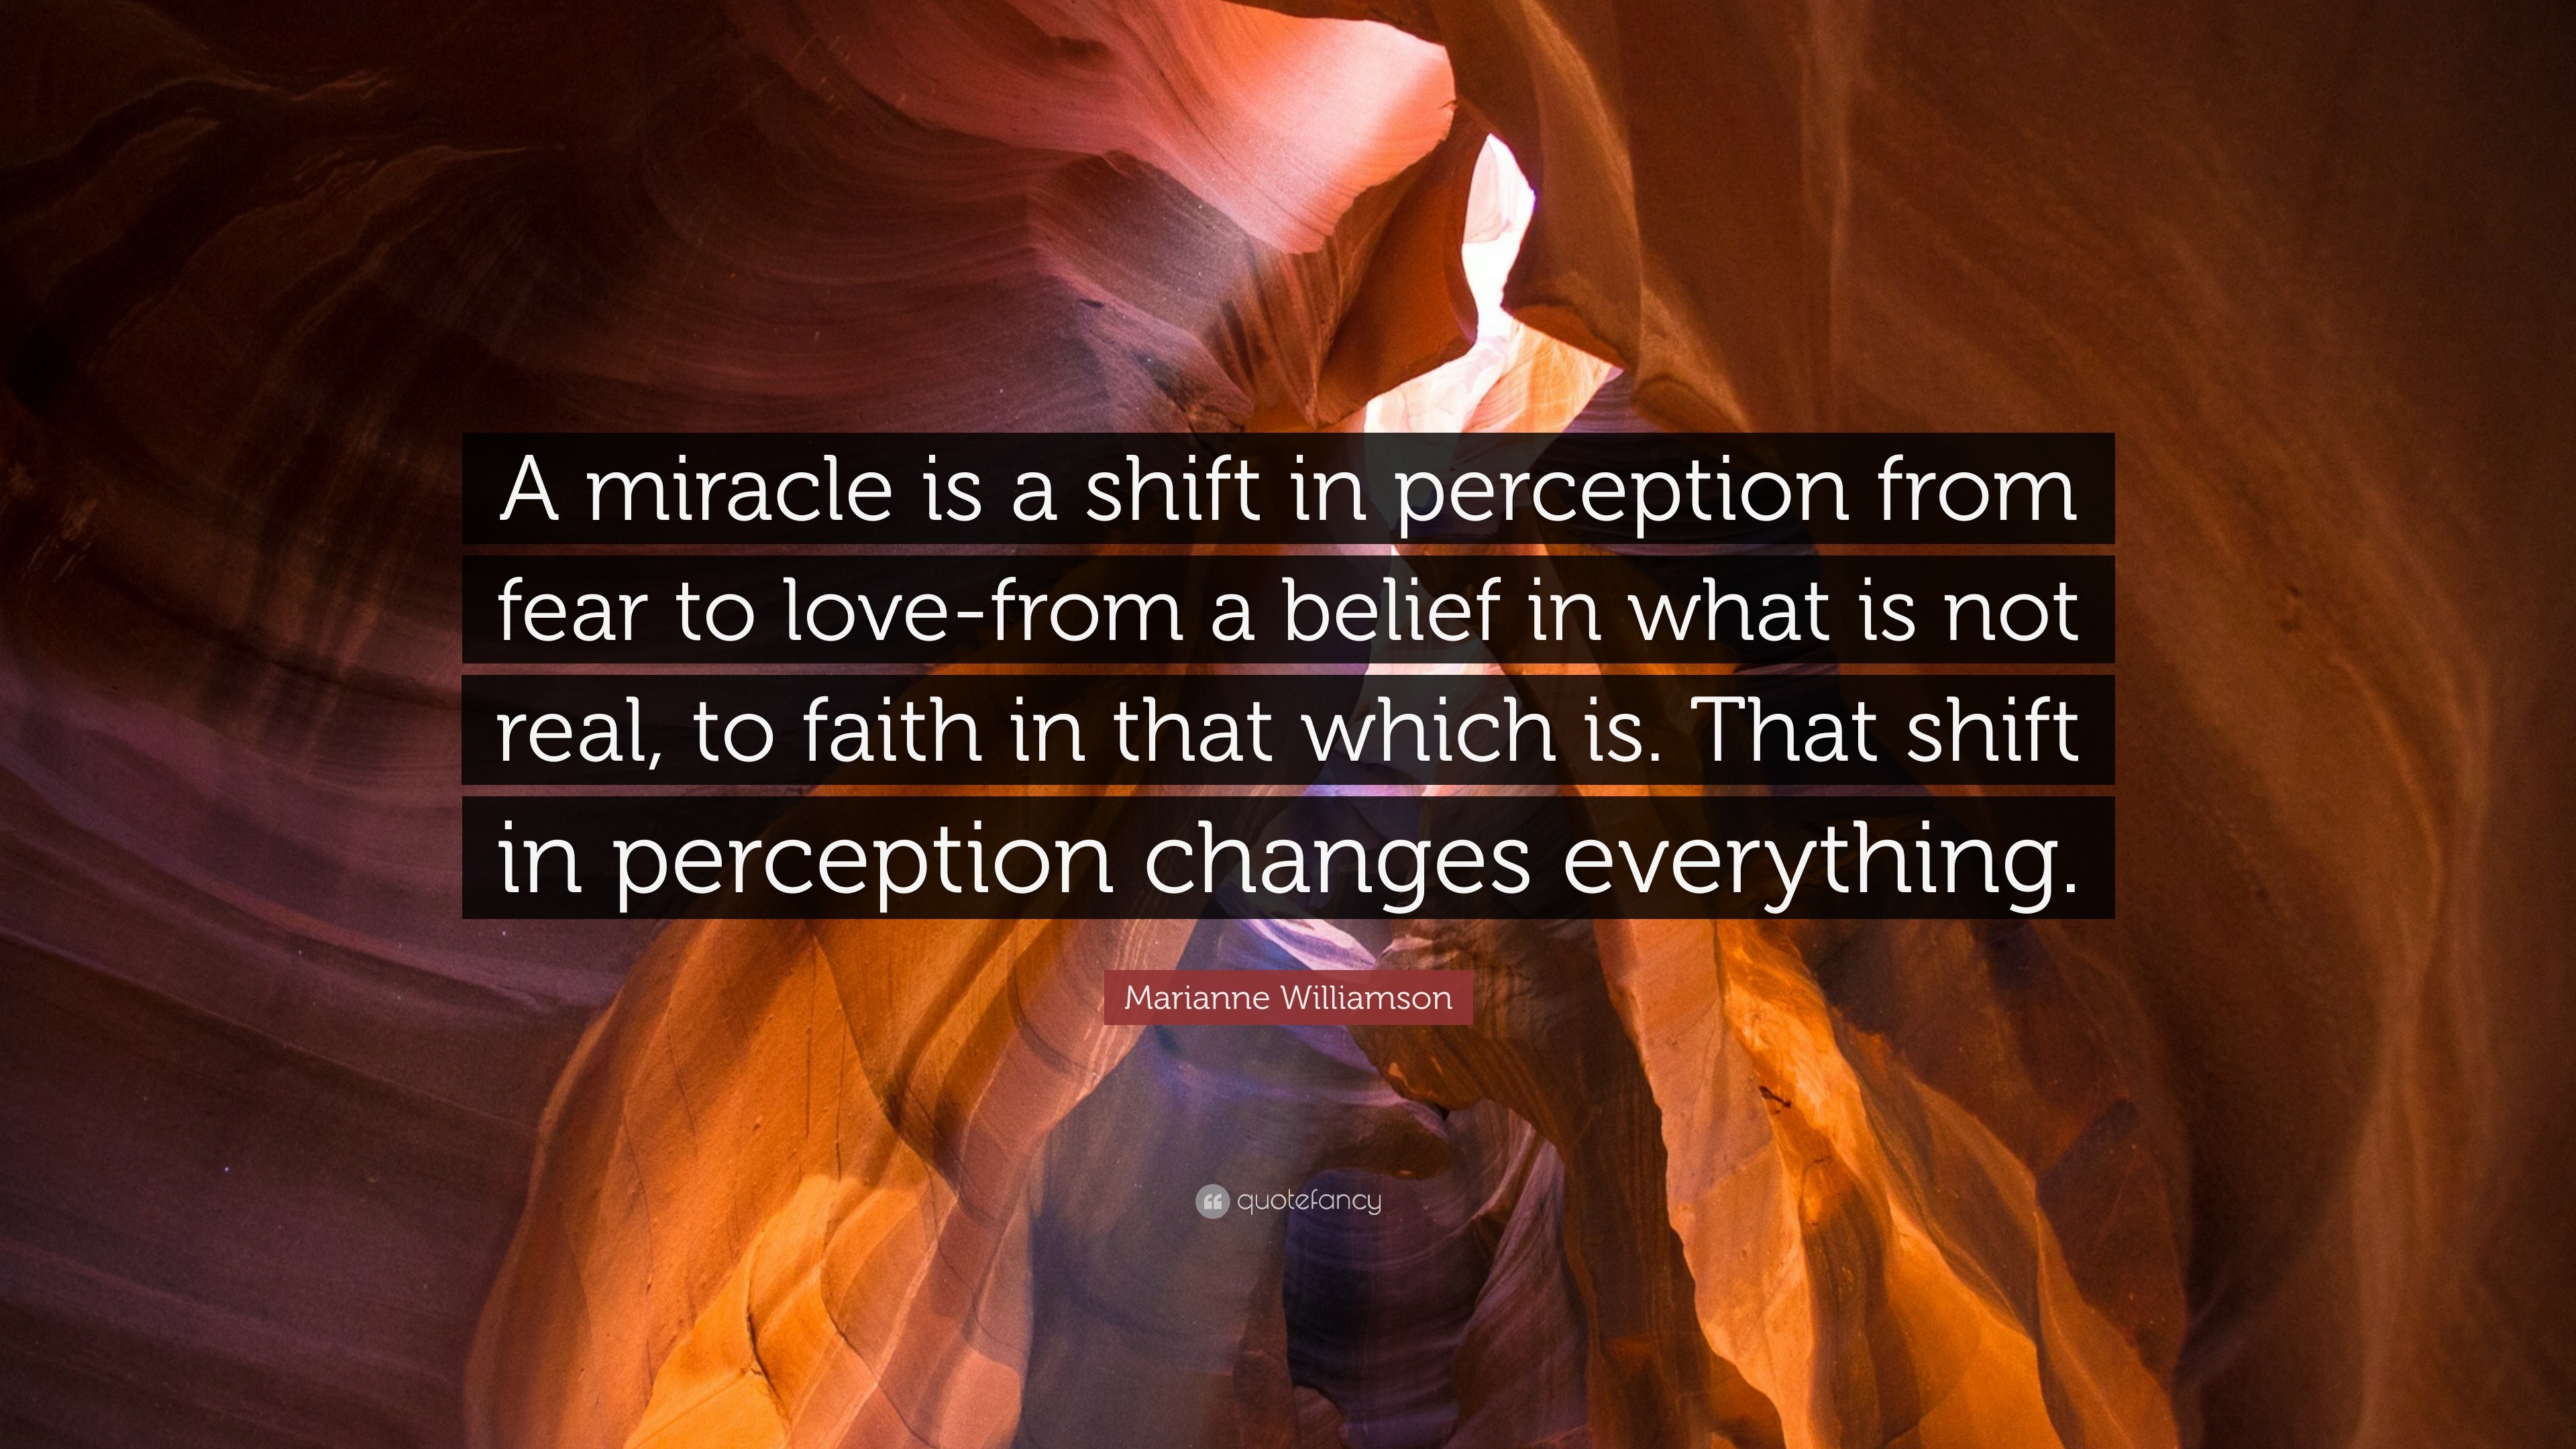 Marianne Williamson Quote: “A miracle is a shift in perception from ...